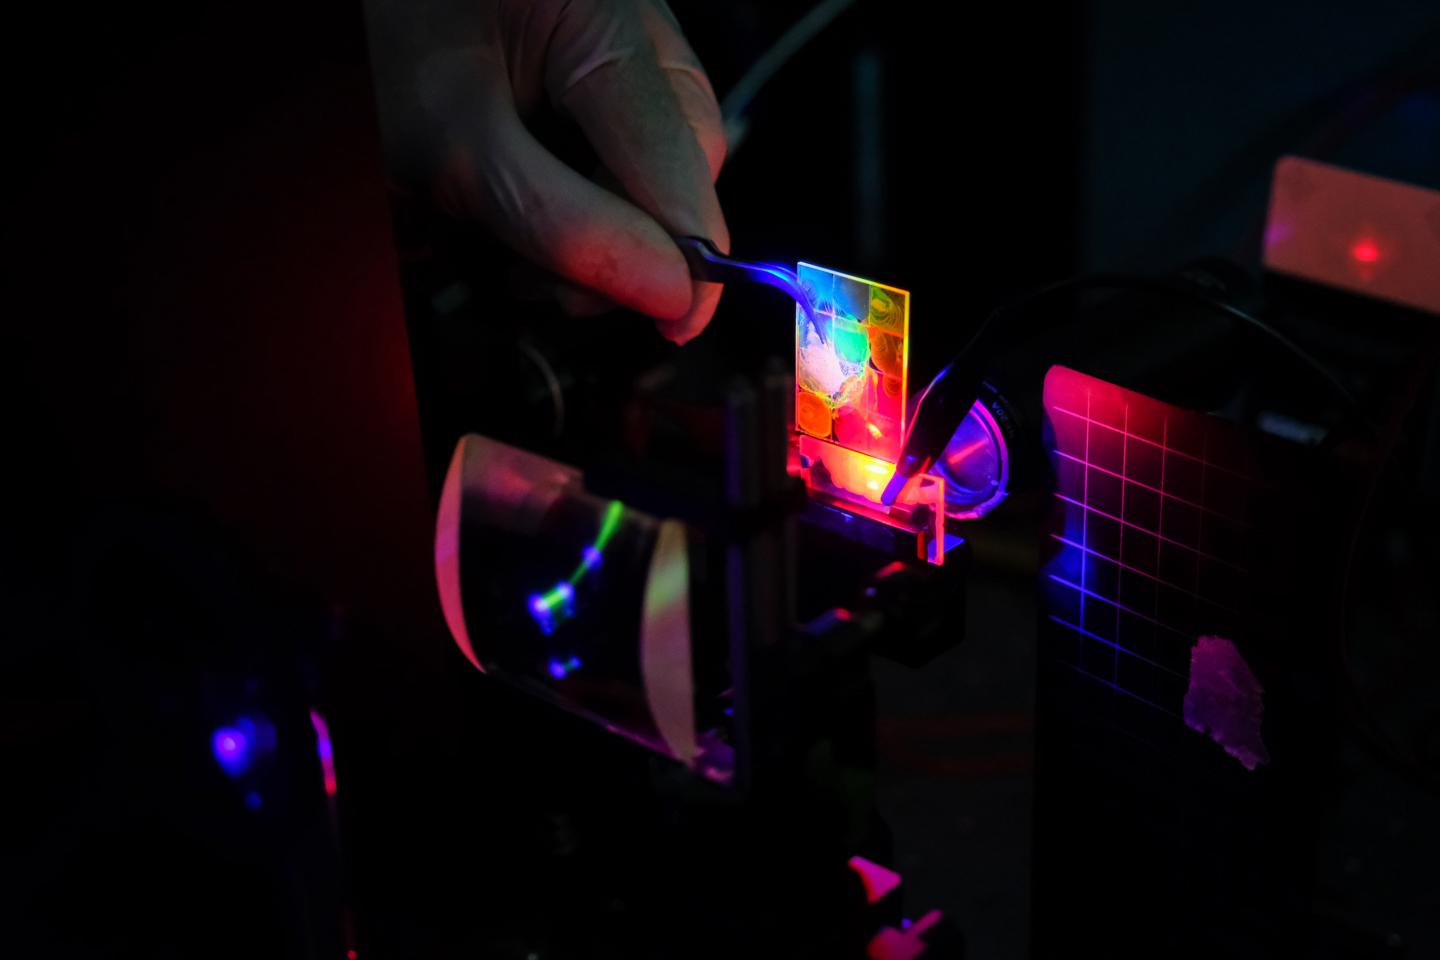 Glass plates with colloidal quantum dots emitting light when electrically and optically pumped. Courtesy of NTU Singapore.